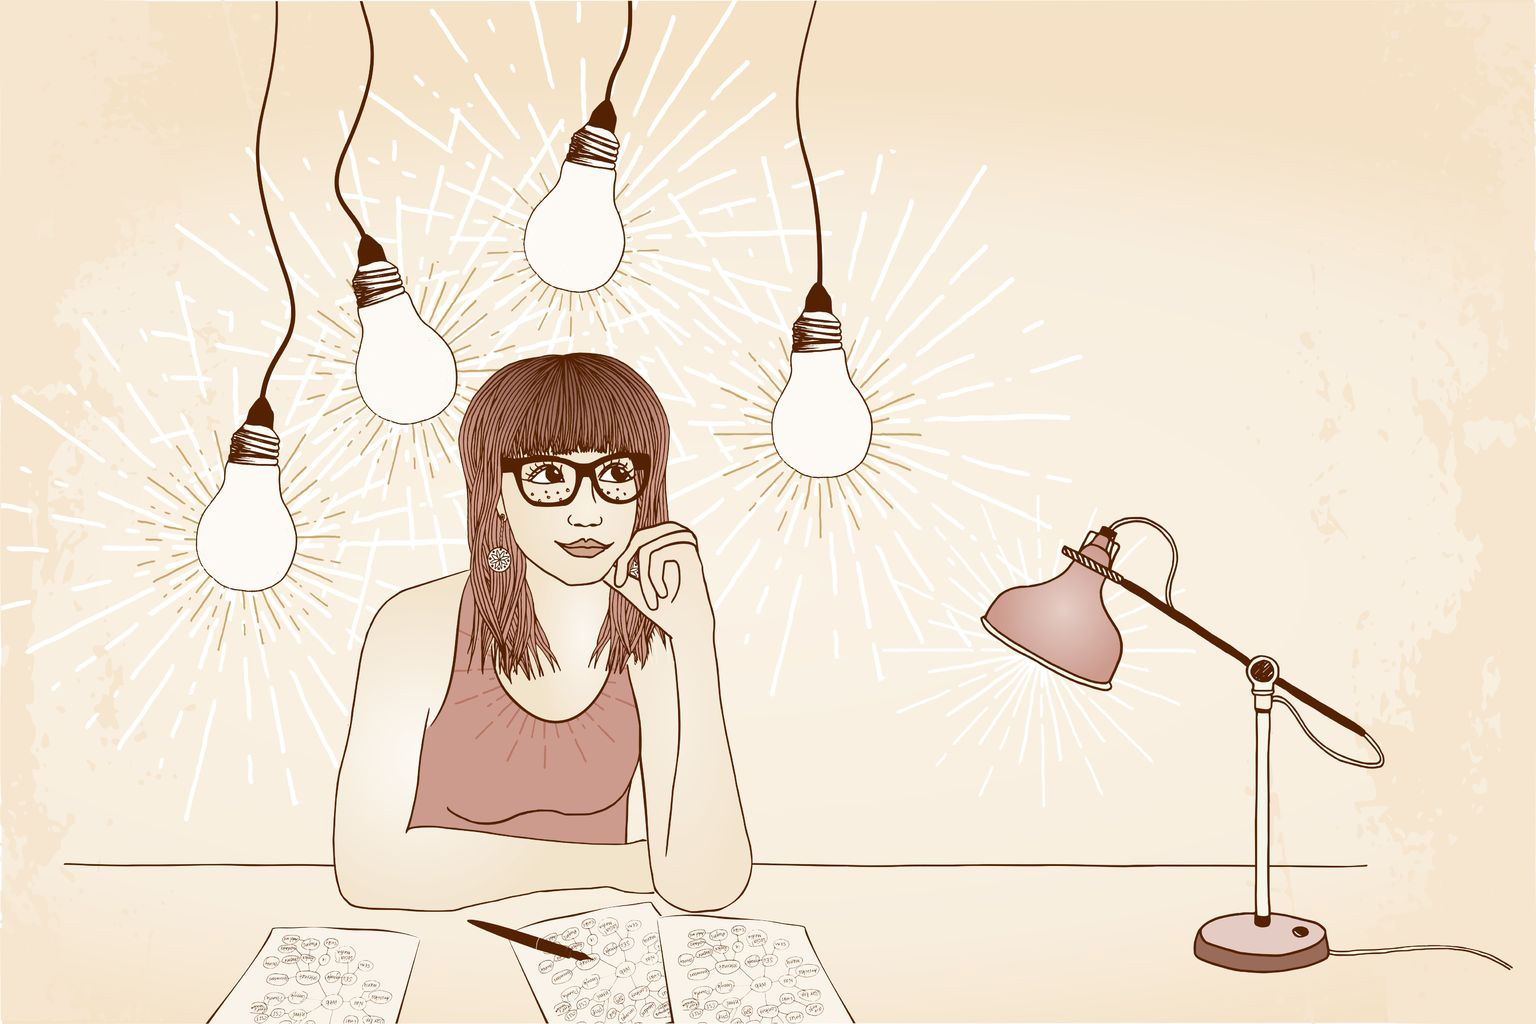 48042947 - hand drawn illustration of a young woman with glasses, thinking and imagining new and innovative ideas